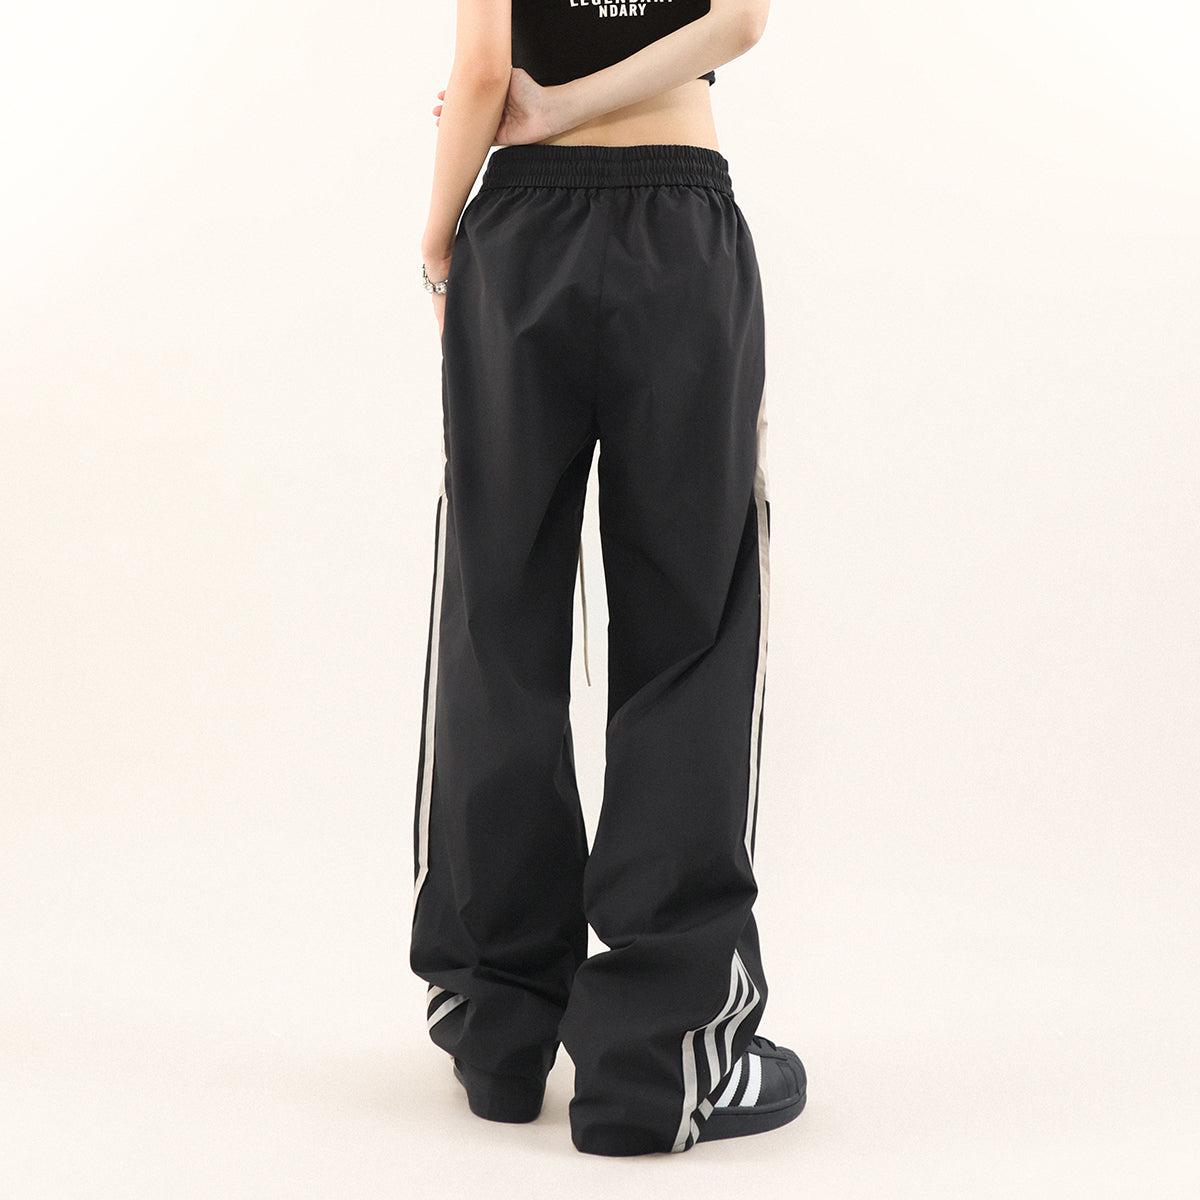 Mr Nearly Side Stripes Stitched Track Pants Korean Street Fashion Pants By Mr Nearly Shop Online at OH Vault